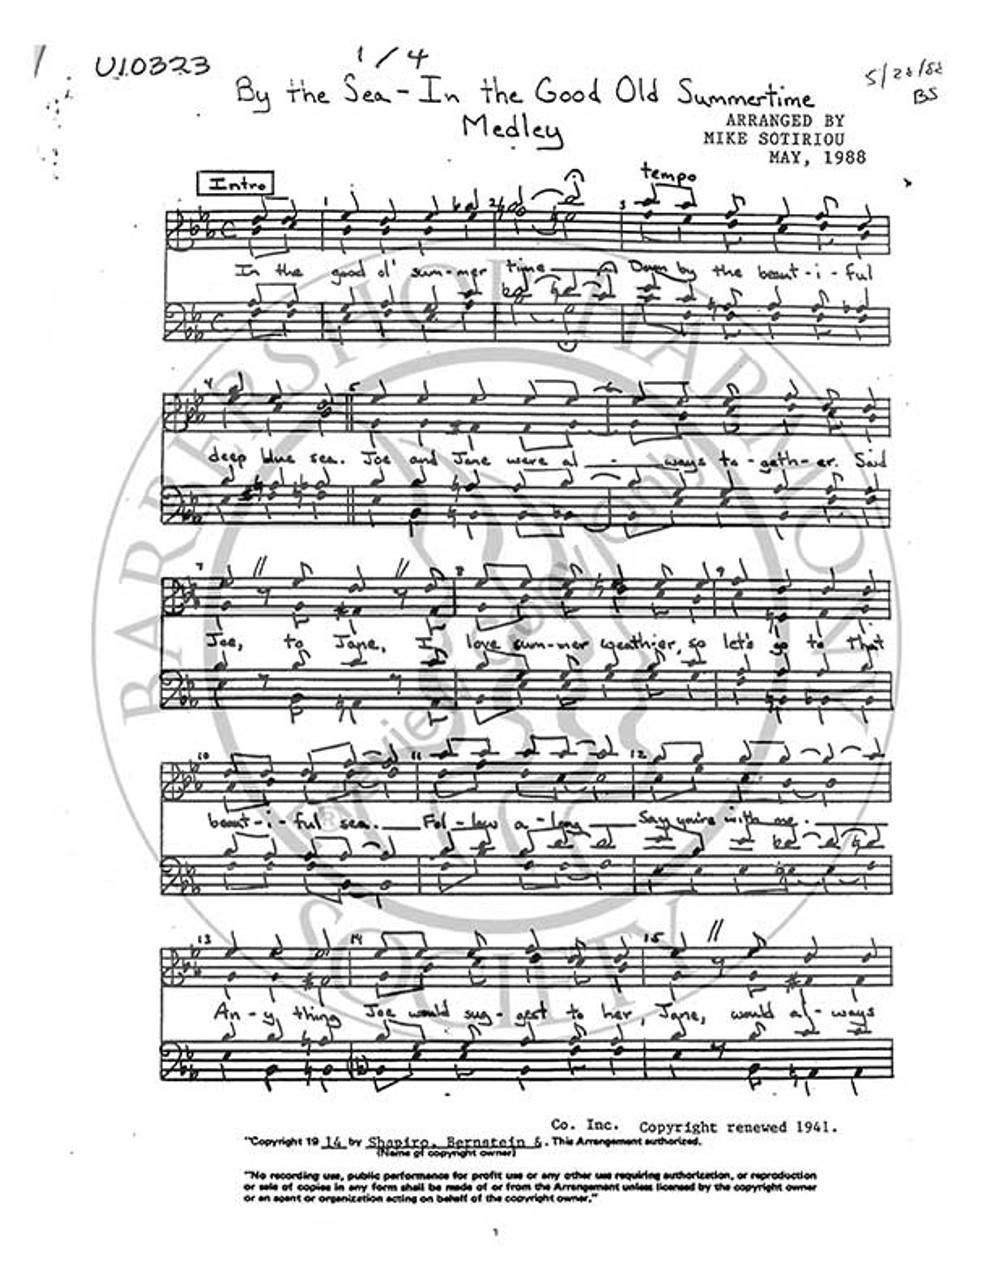 By The SeaI/In The Good Old Summertime Medley 1 (TTBB) (arr. Mike Sotiriou)-Download-UNPUB